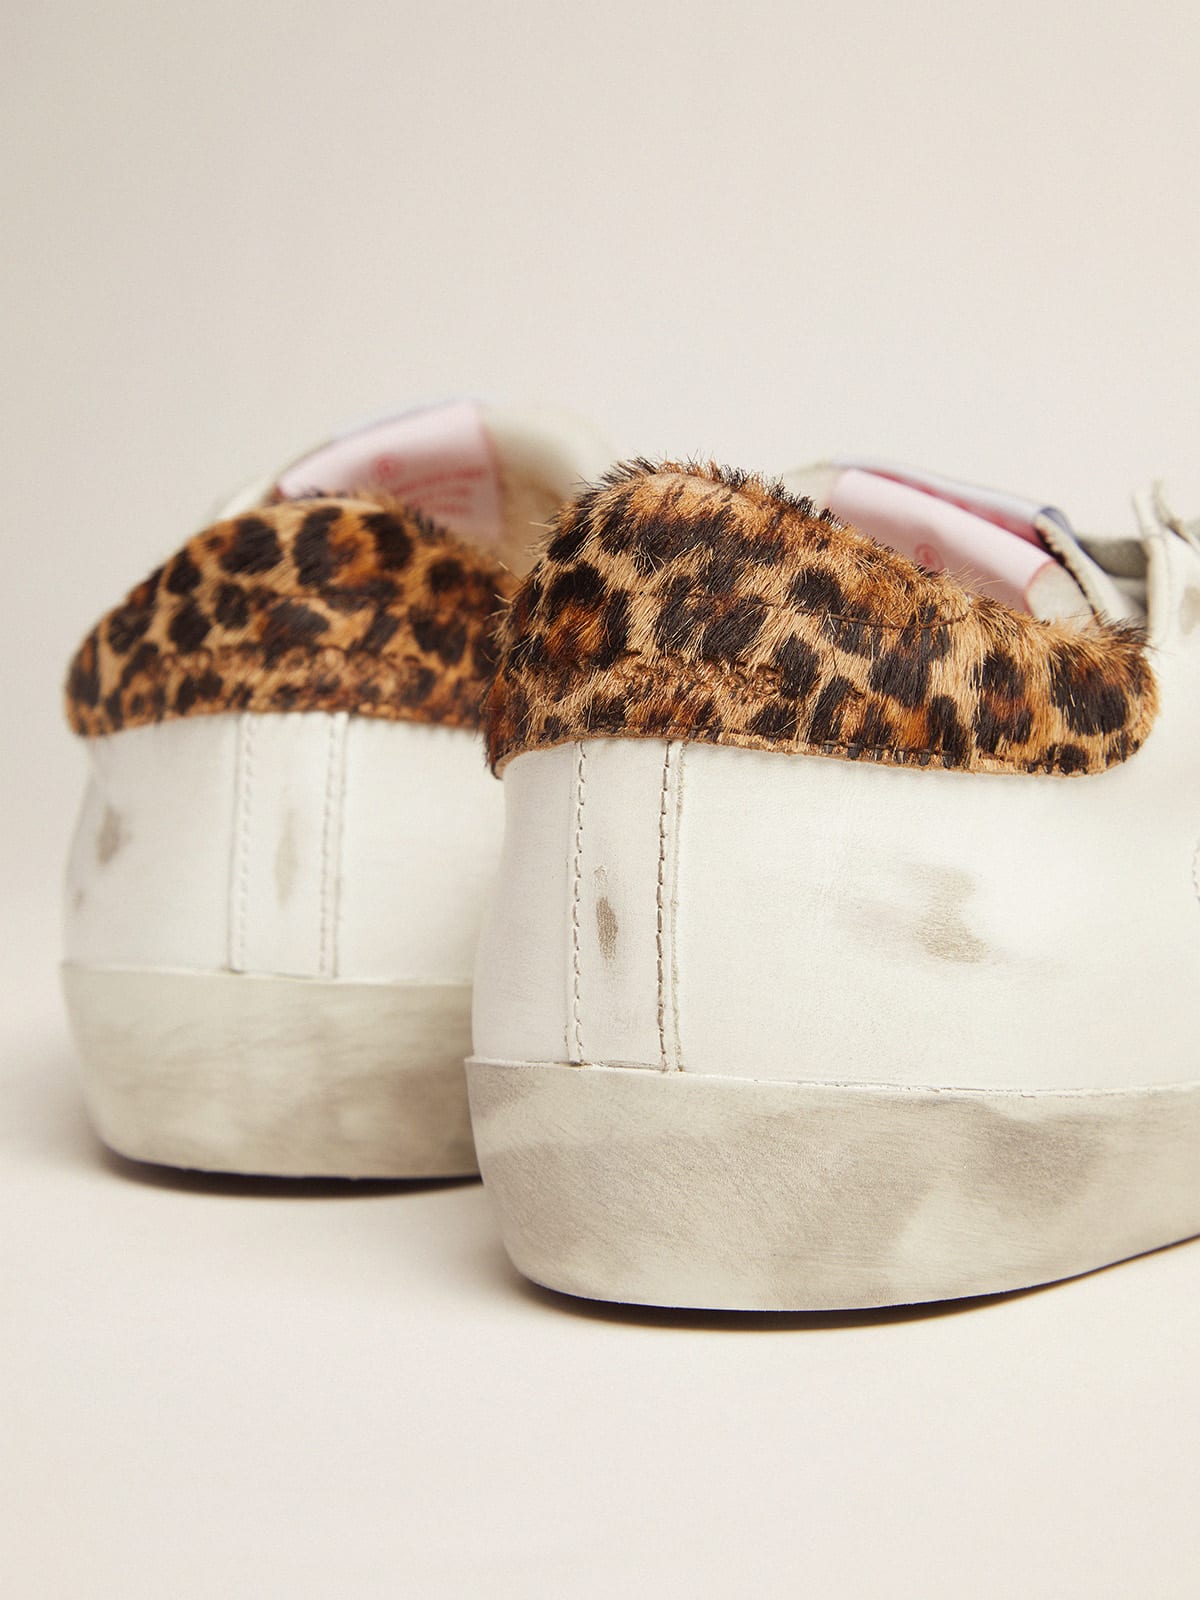 Golden Goose - Men's Limited Edition LAB Super-Star sneakers with leopard-print heel tab in 